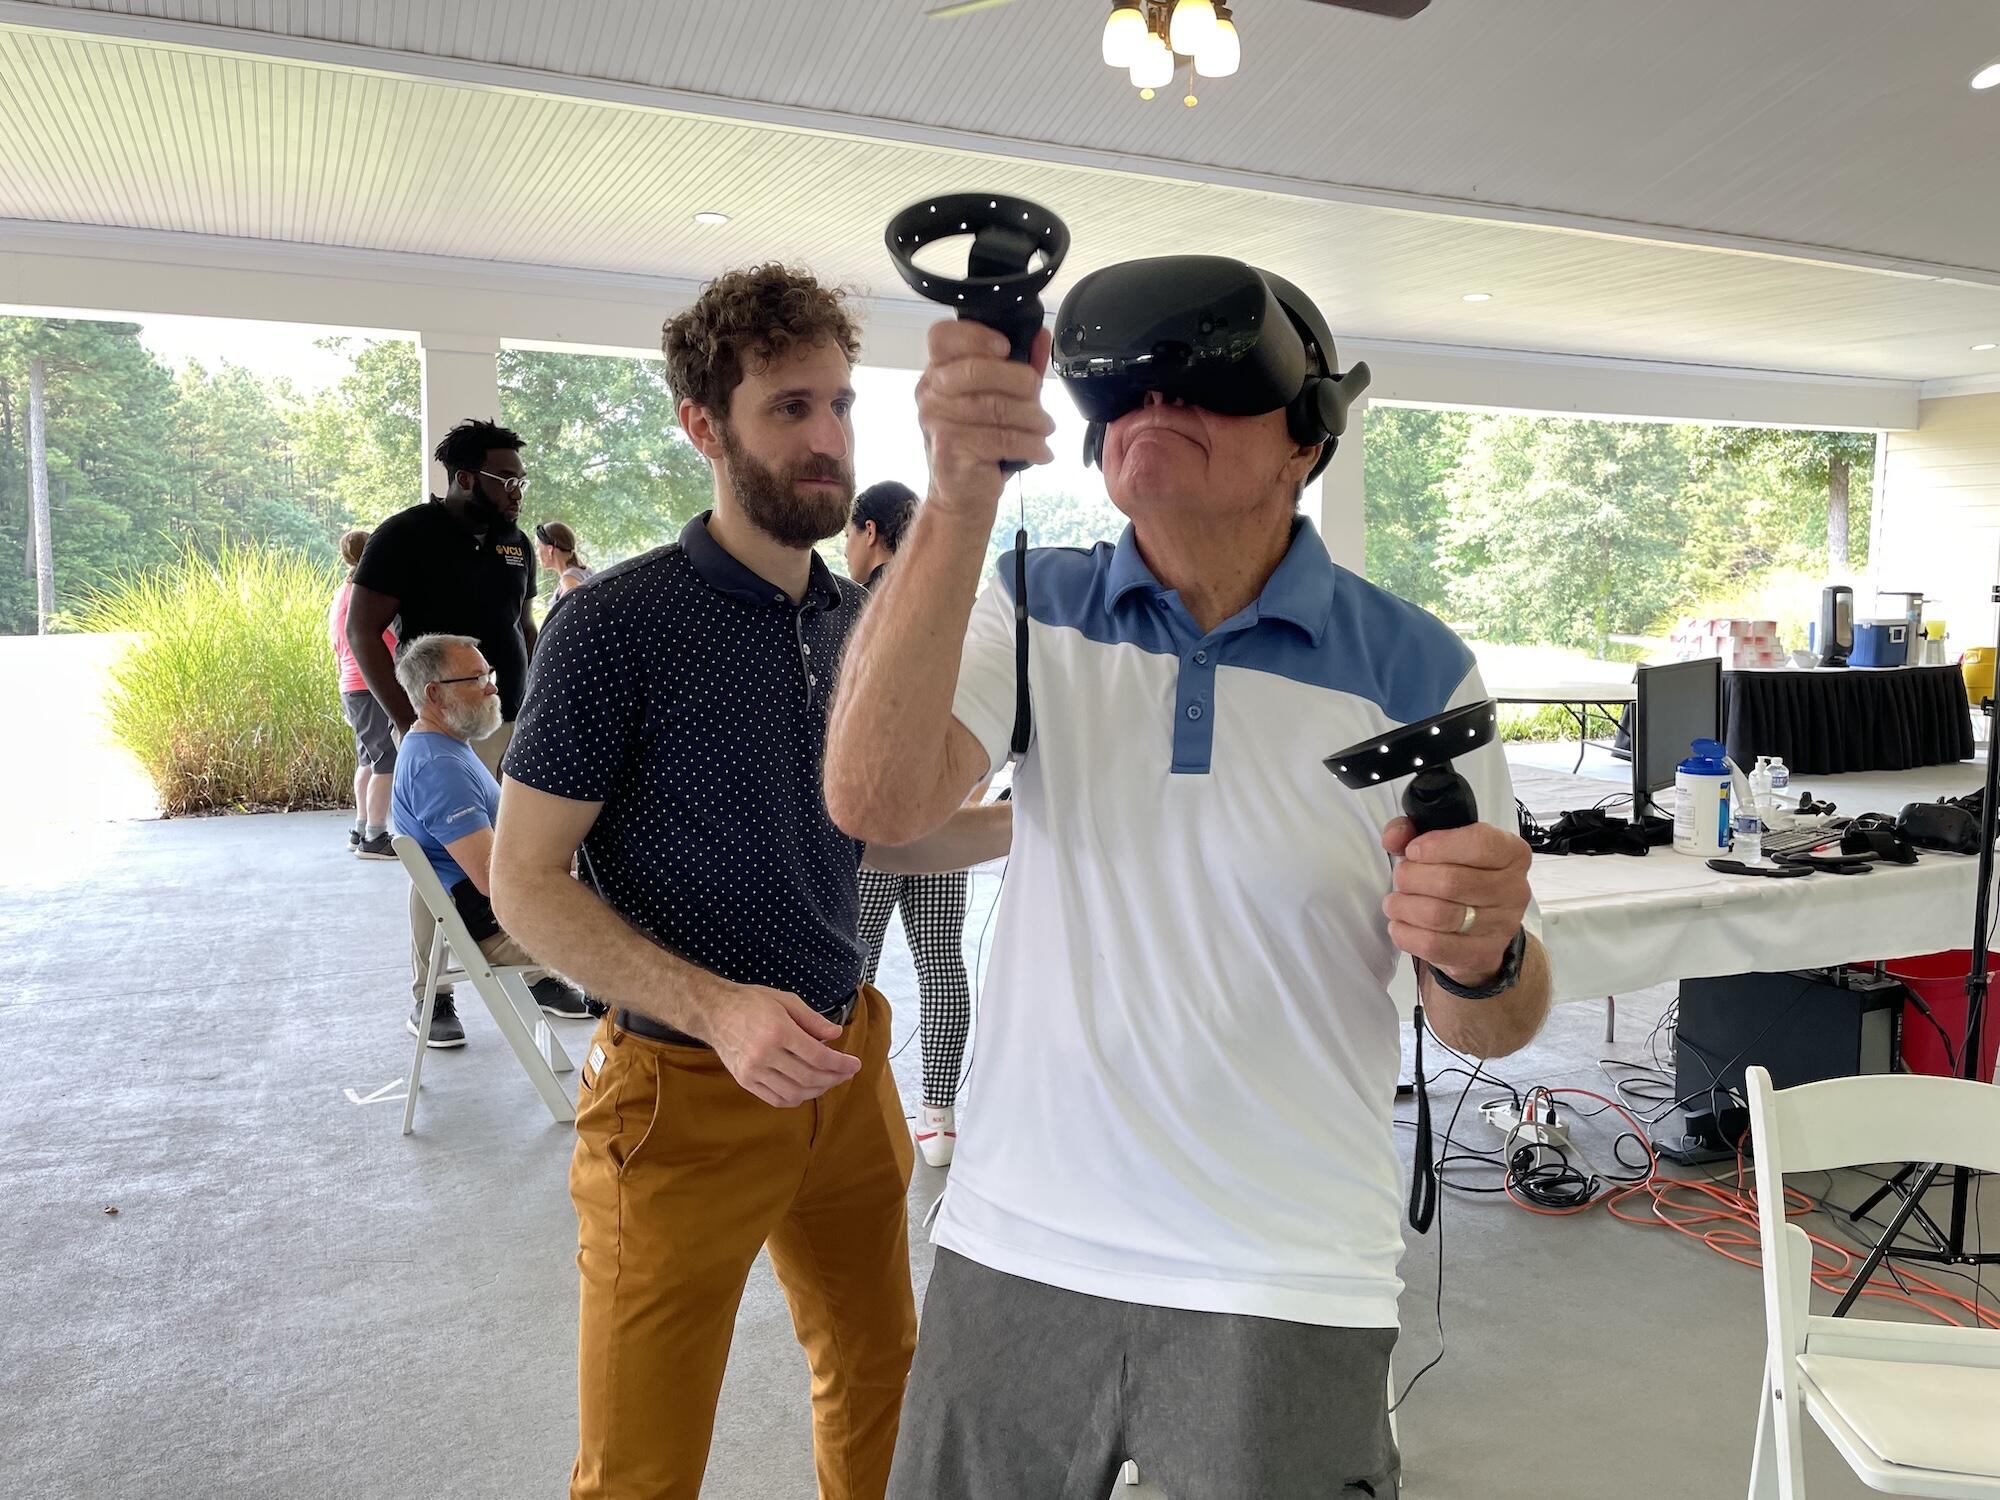 Alexander Stamenkovic and Bill McDaniel, trying out a dodgeball game using a VR headset.